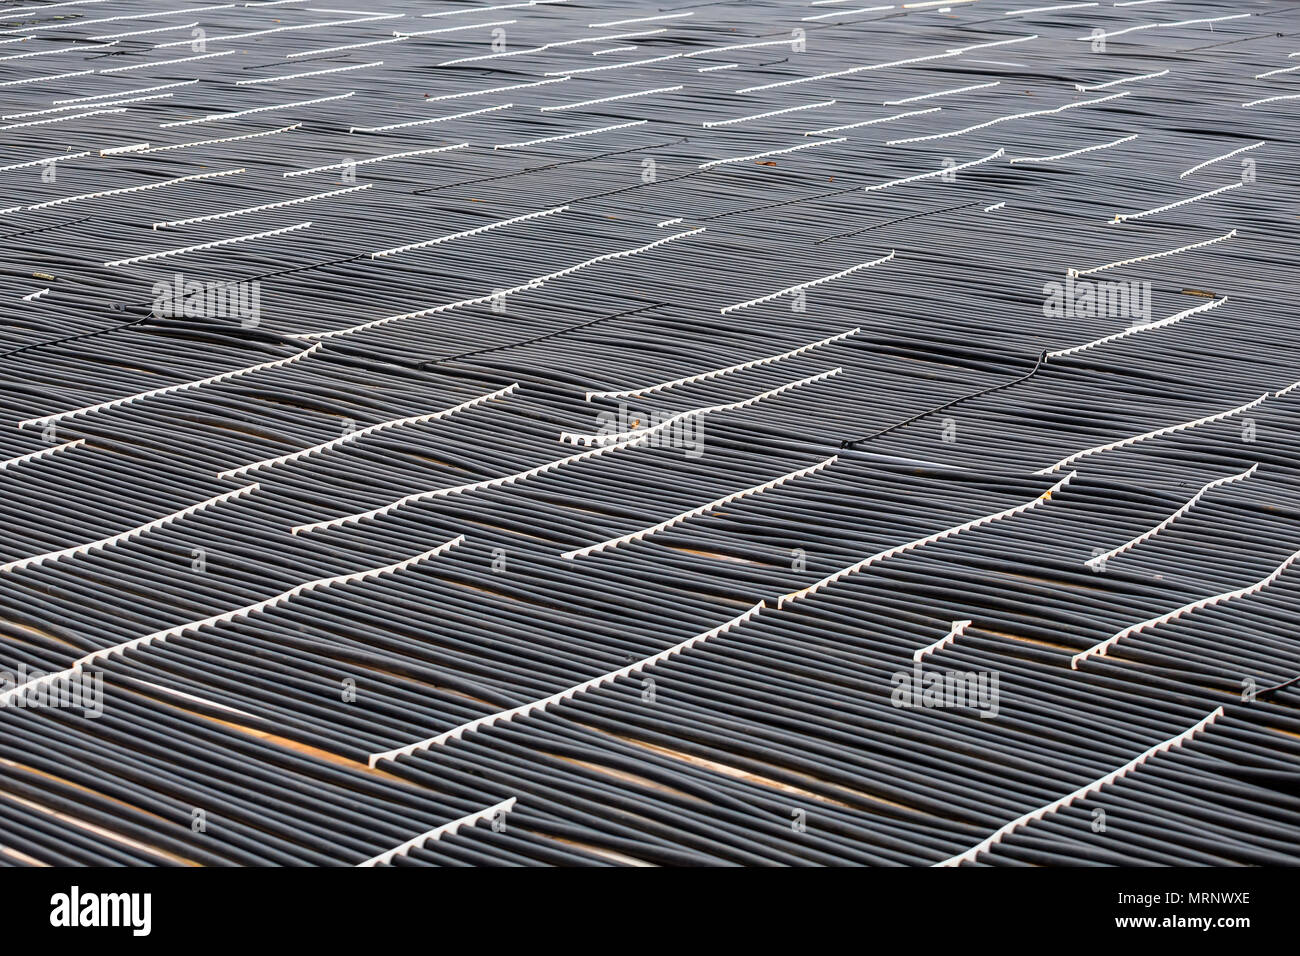 Rink Ice Portable Piping System Background Outdoor Portable Refrigerated Ice Rink Cooling Systems Stock Photo Alamy